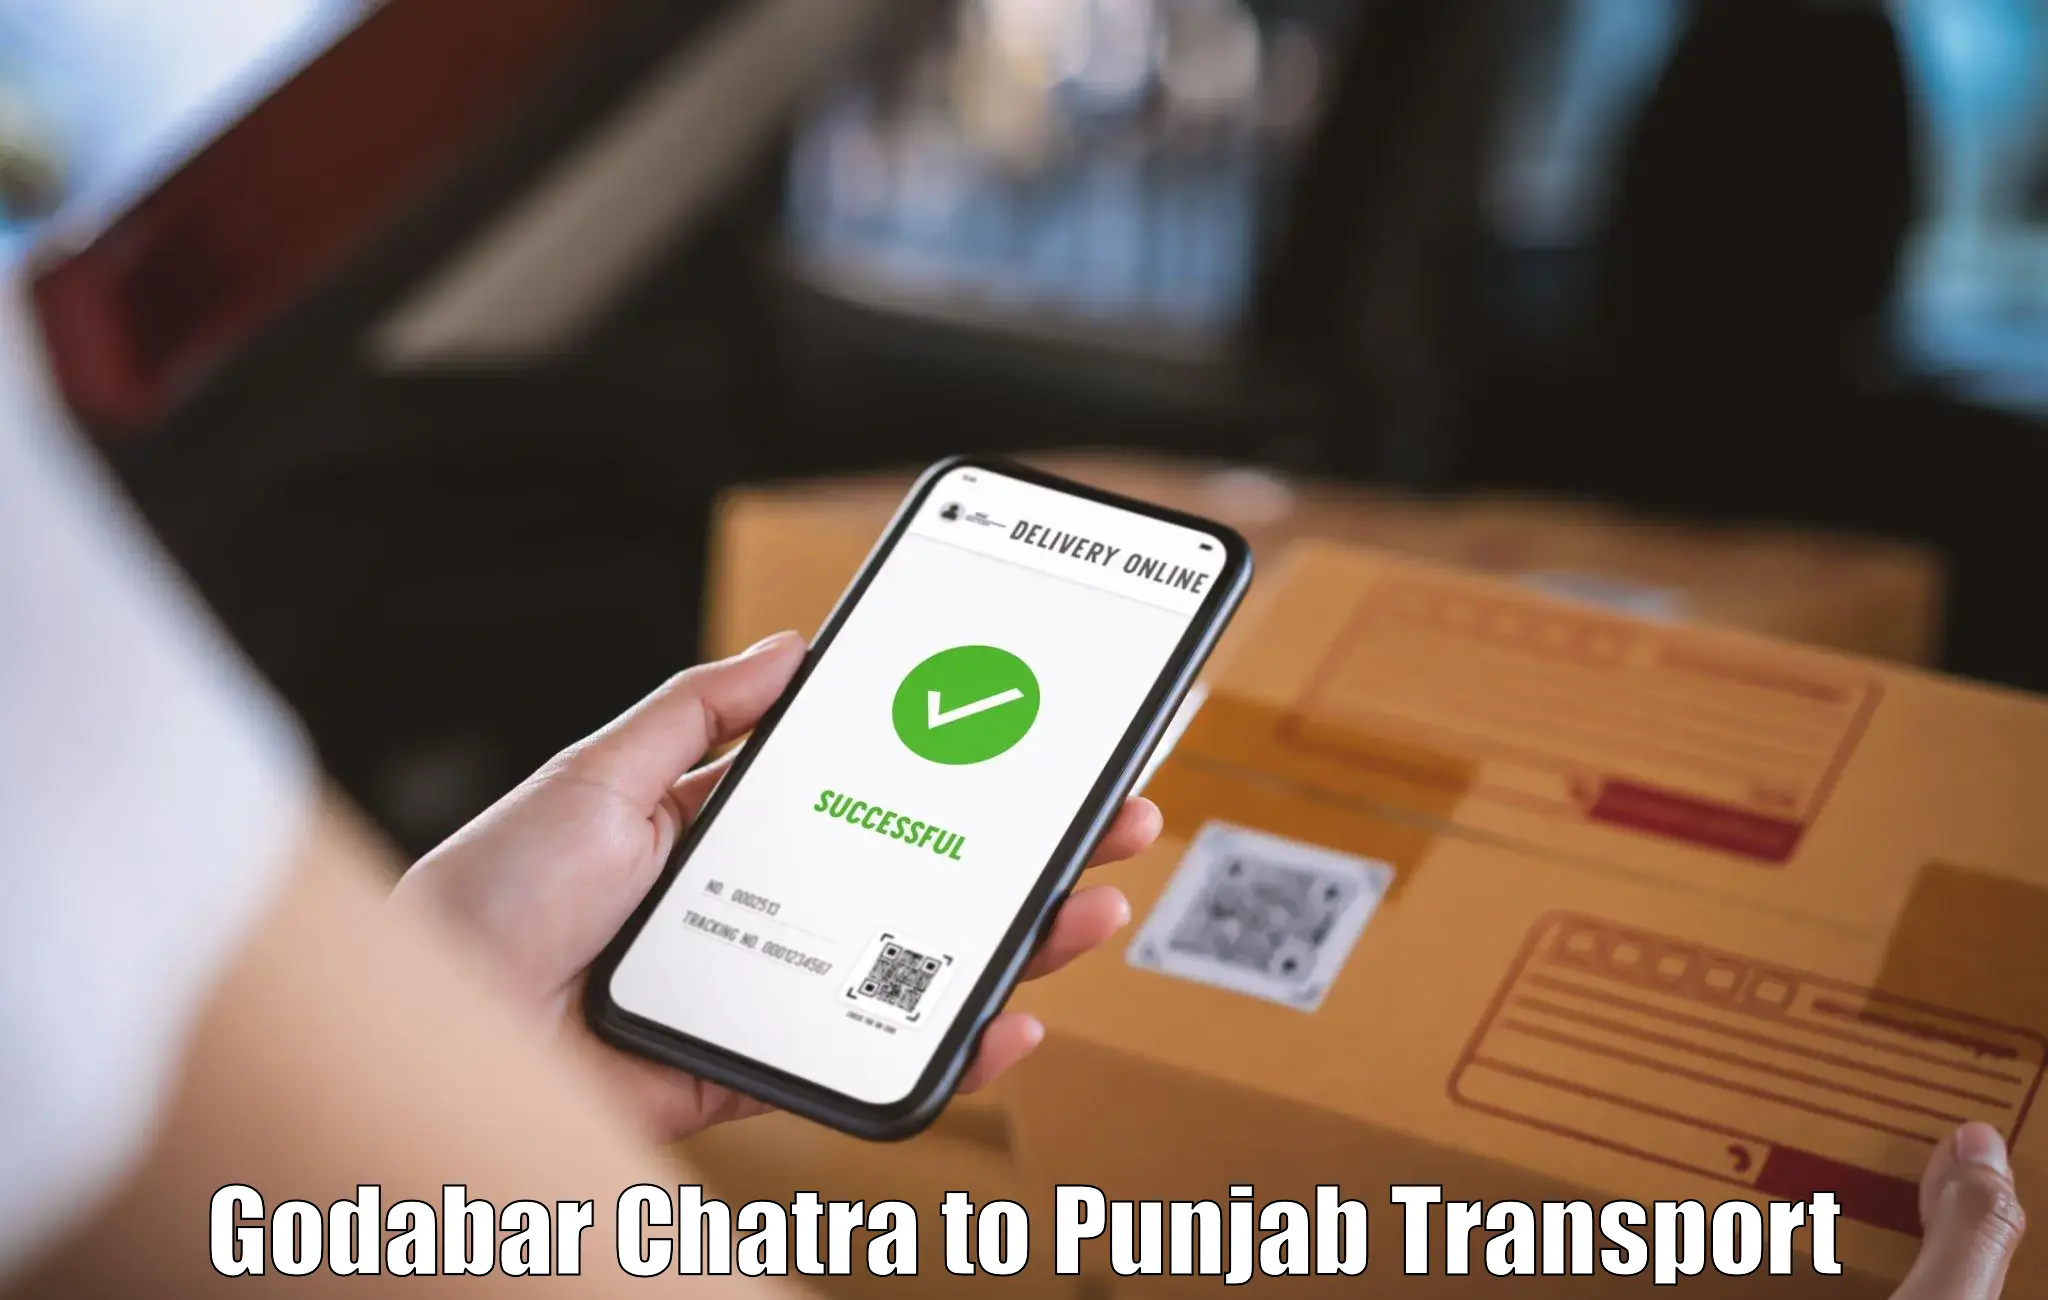 Parcel transport services Godabar Chatra to Sultanpur Lodhi